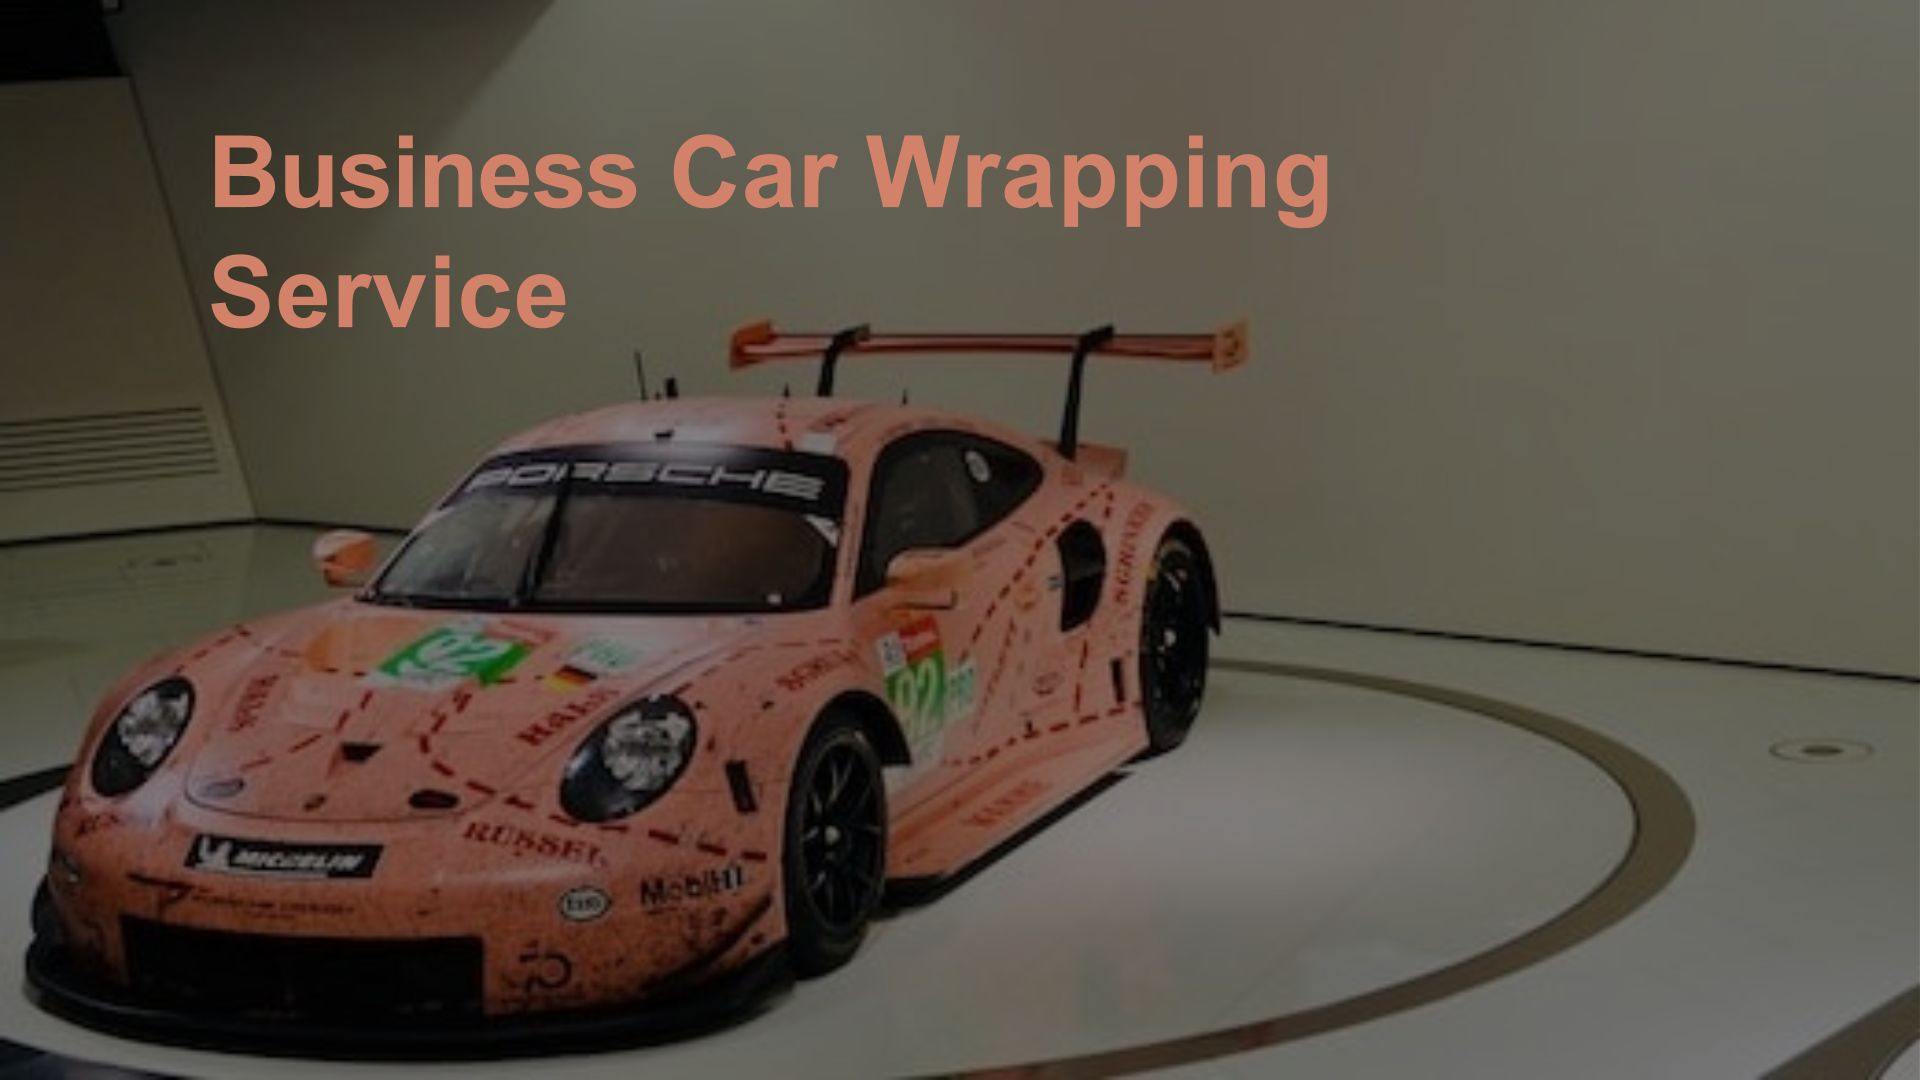 Business Car Wrapping Service